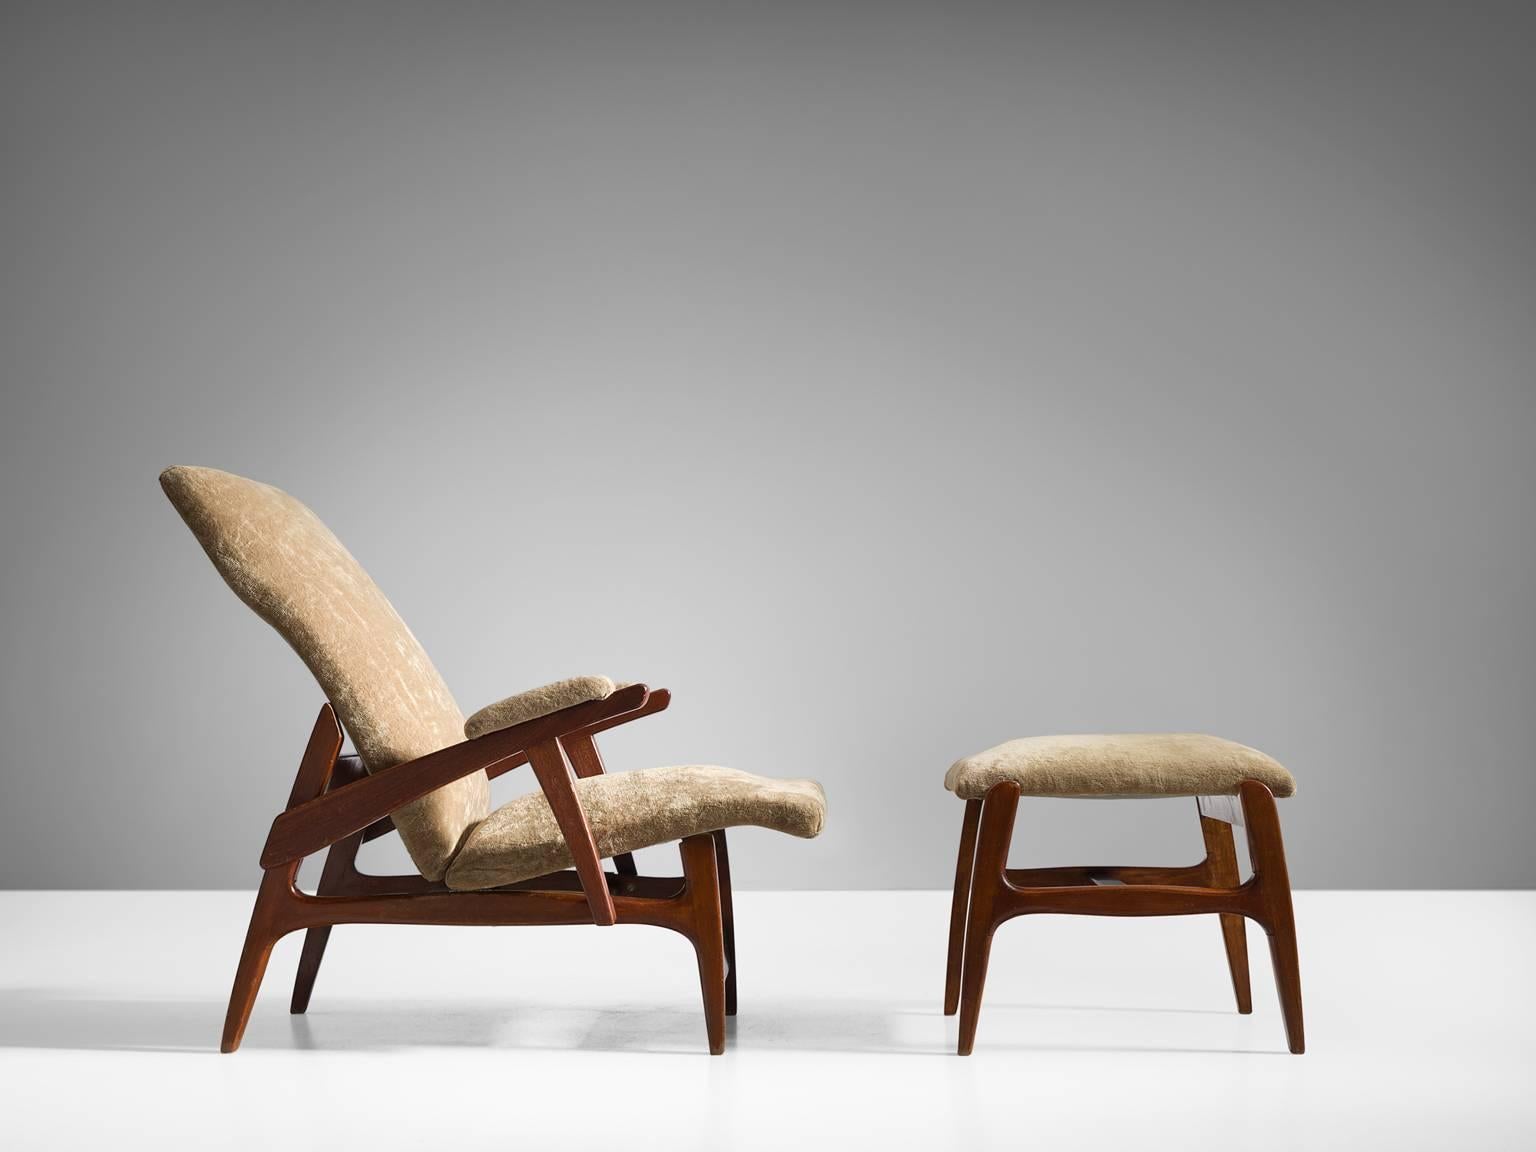 Lounge chairs with stool, suede and wood, France, 1950s

This sculptural France easy chair is both aesthetically challenging and original. The frame features wonderful curved finished and angles. The chair is truly comfortable through by means of